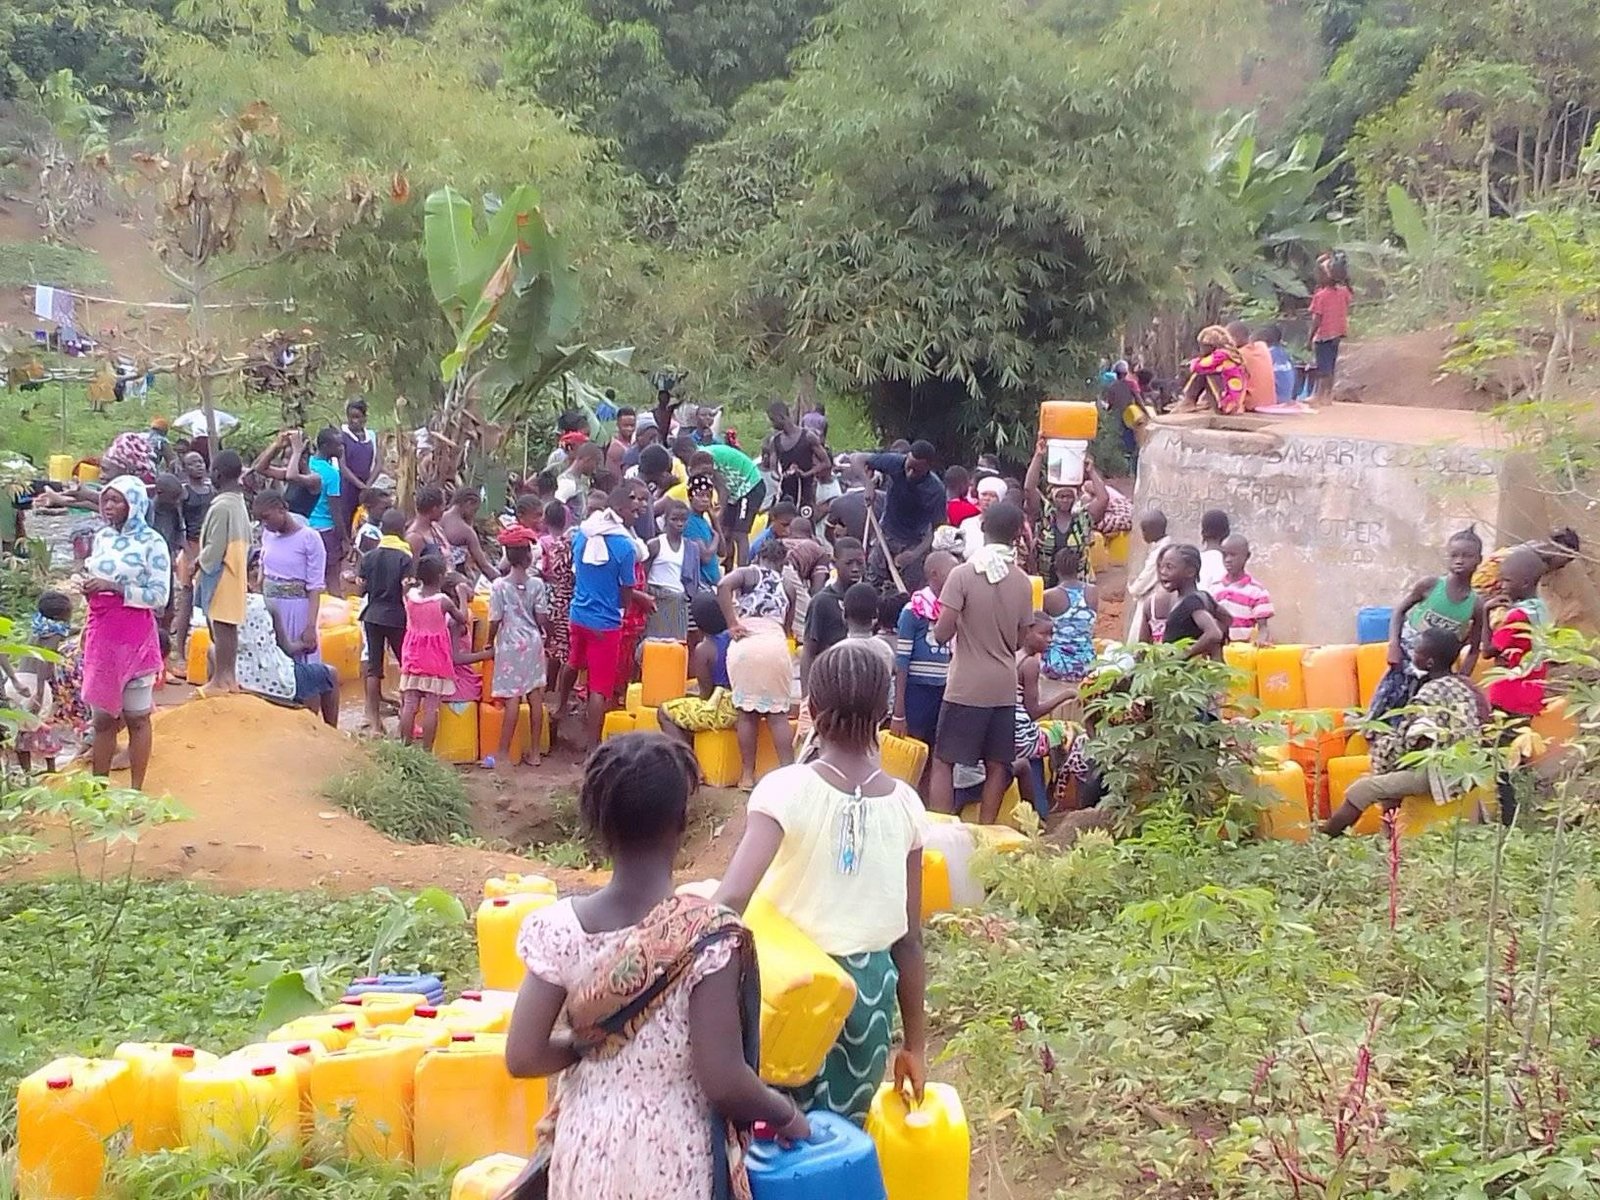 Children waiting in-turns to get water at some wells in March at Fourah Bay College Botanical Garden popularly known as botany at Leicester Road community 